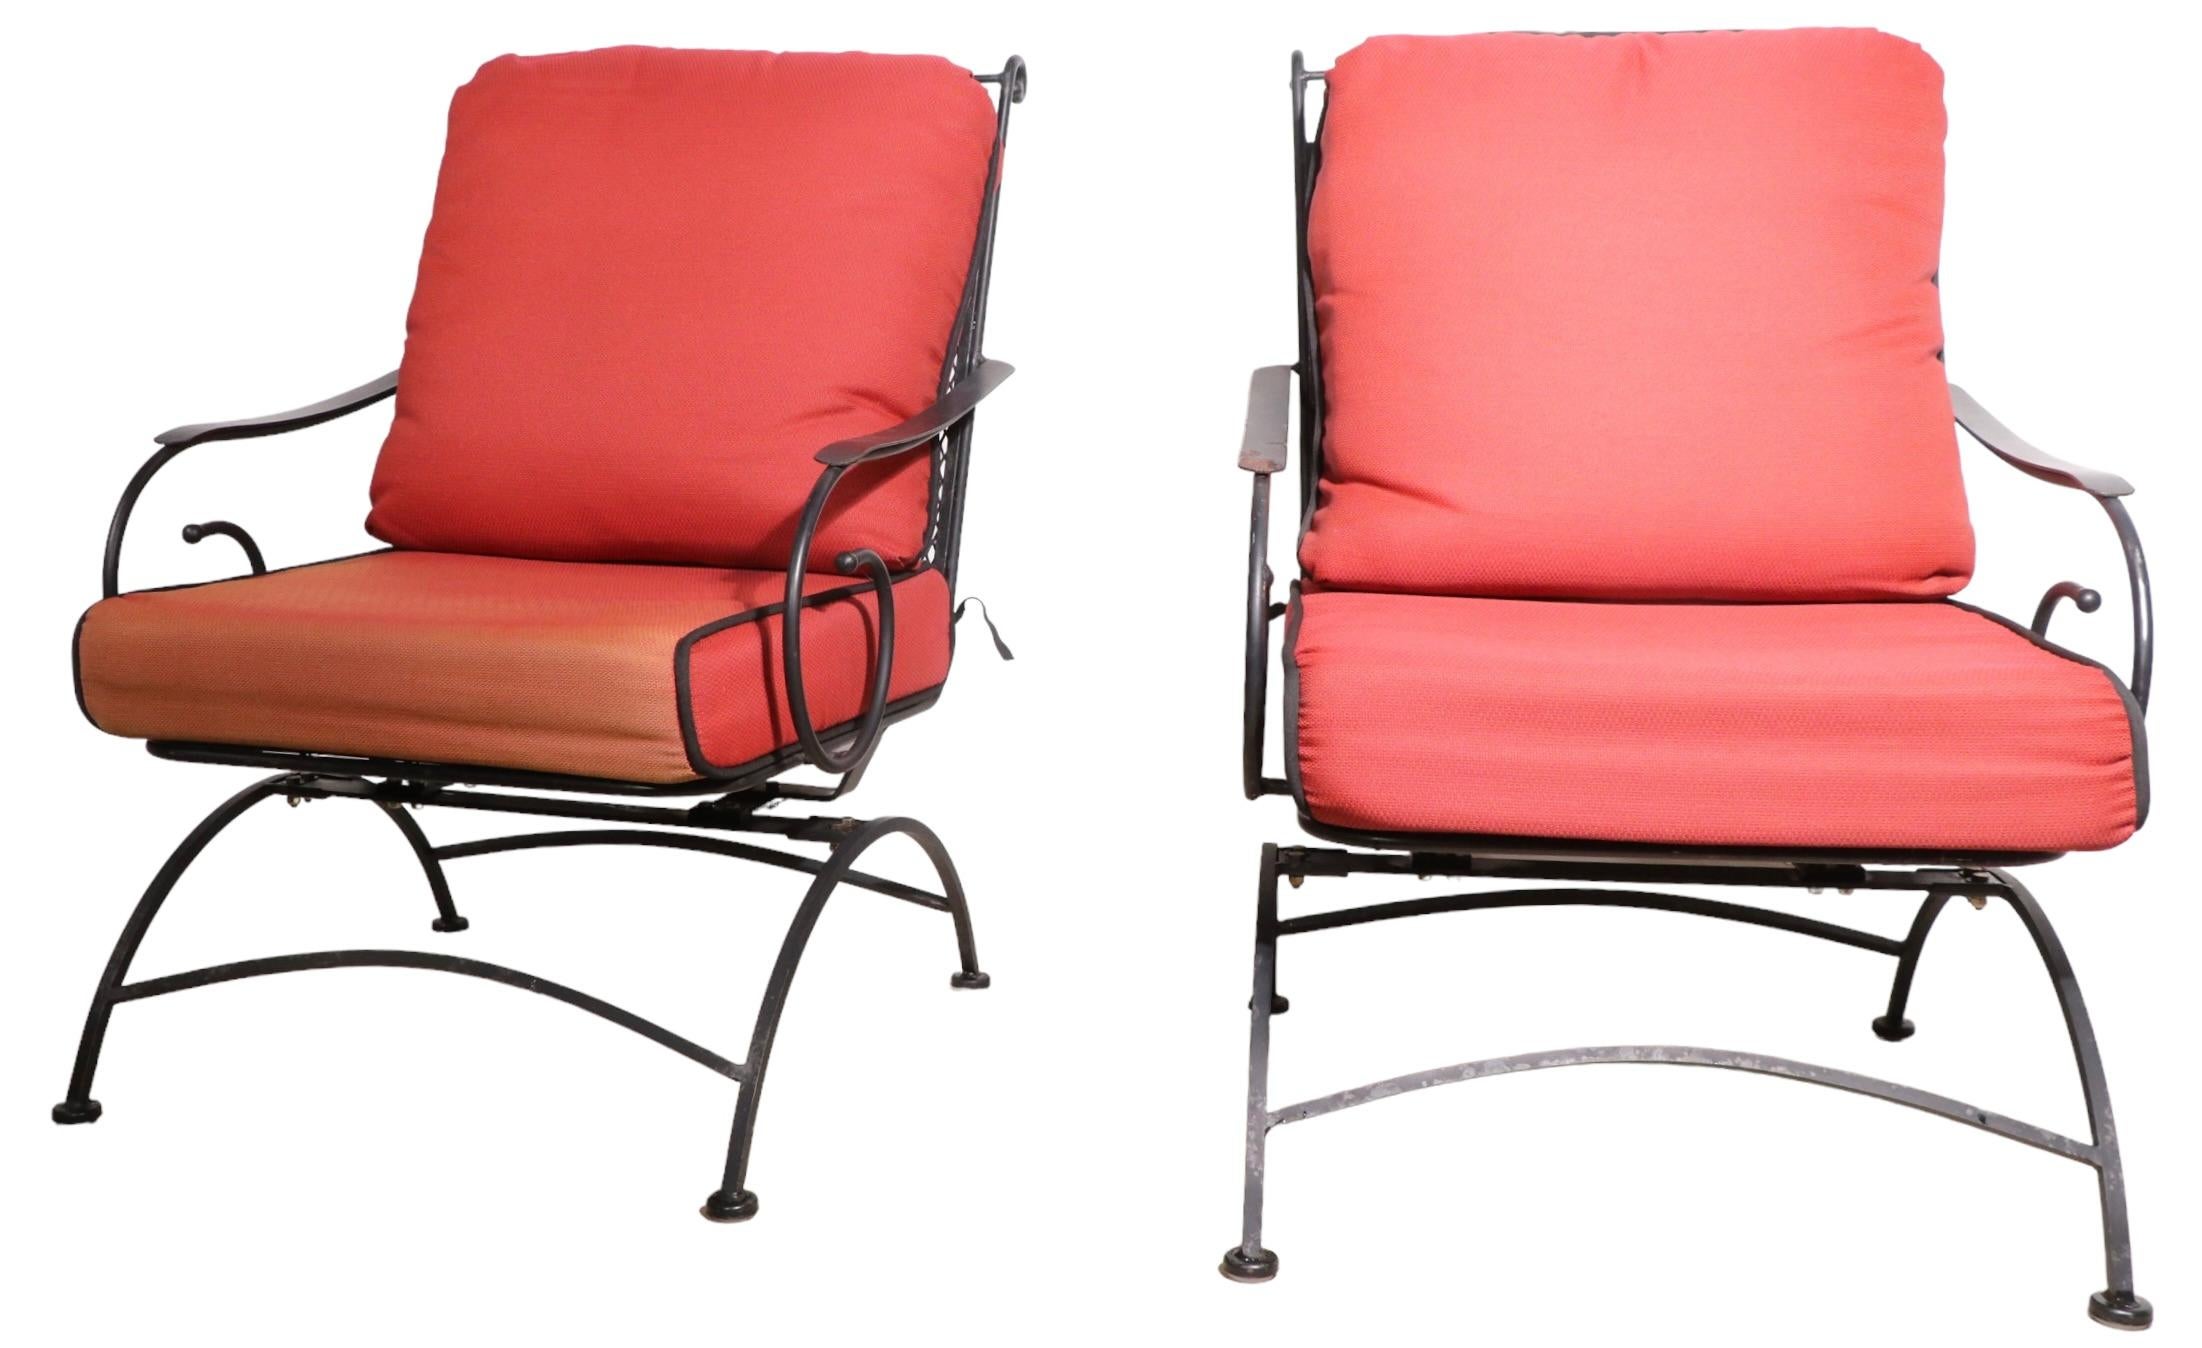 Pair of stylish platform rockers constructed of wrought iron, with metal mesh seats, and backs. The chairs ae complete with removable indoor outdoor cushions, they are clean and ready to use, showing only light cosmetic wear, normal and consistent